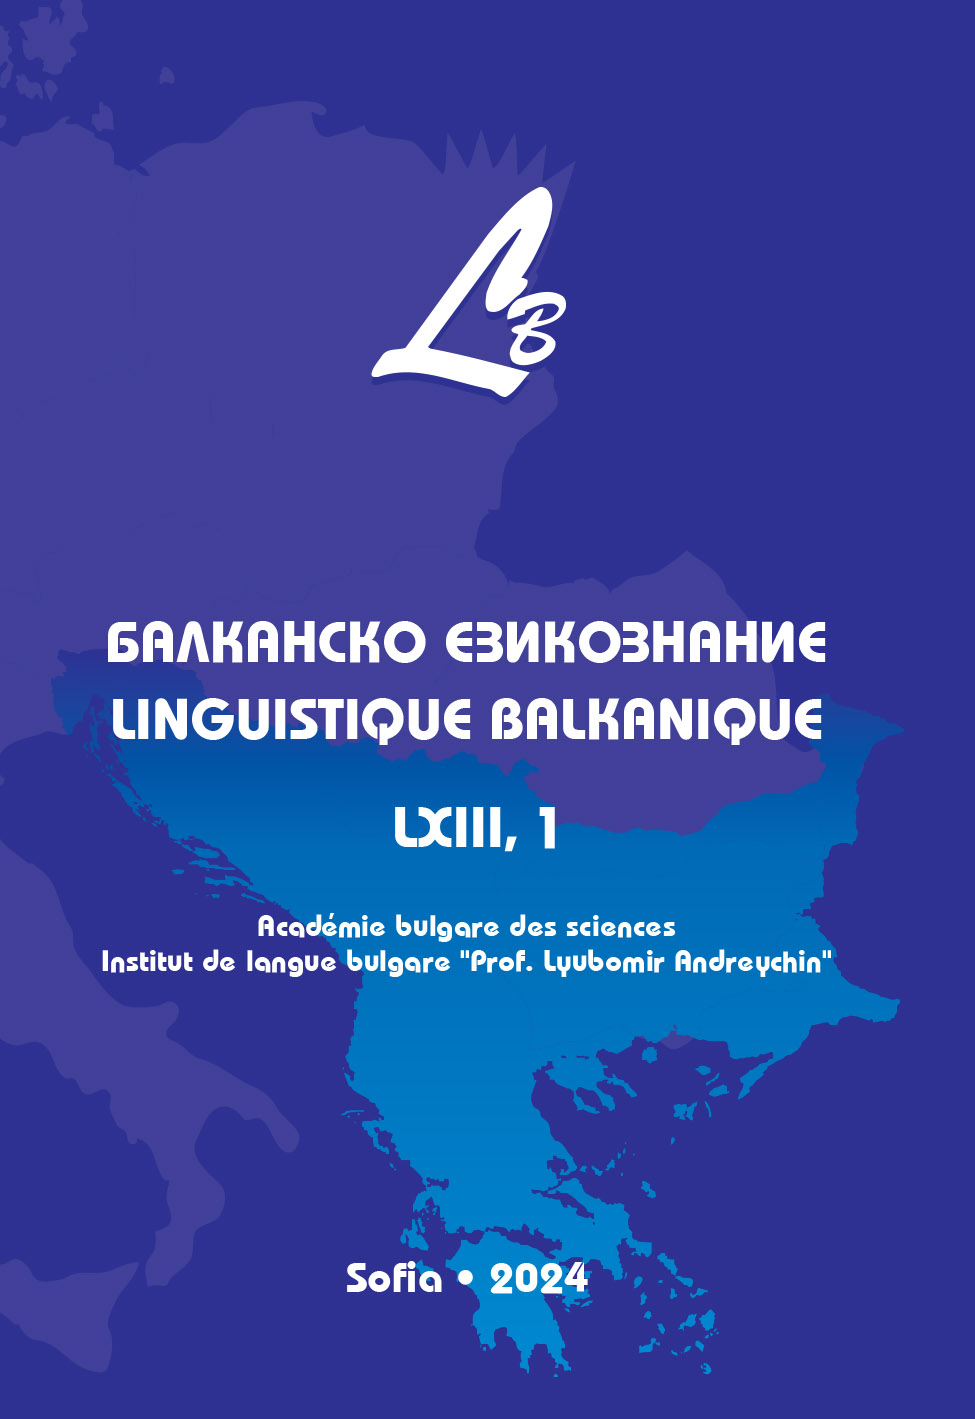 Review of the linguistic materials contained in volume 2, section 2, of the two-volume Makedoniya. Istoriya i kultura ot drevnostta do dnes [Macedonia. History and Culture from Ancient Times to the Present] (2023); Ezikoznanie [Linguistics], ed. Geor